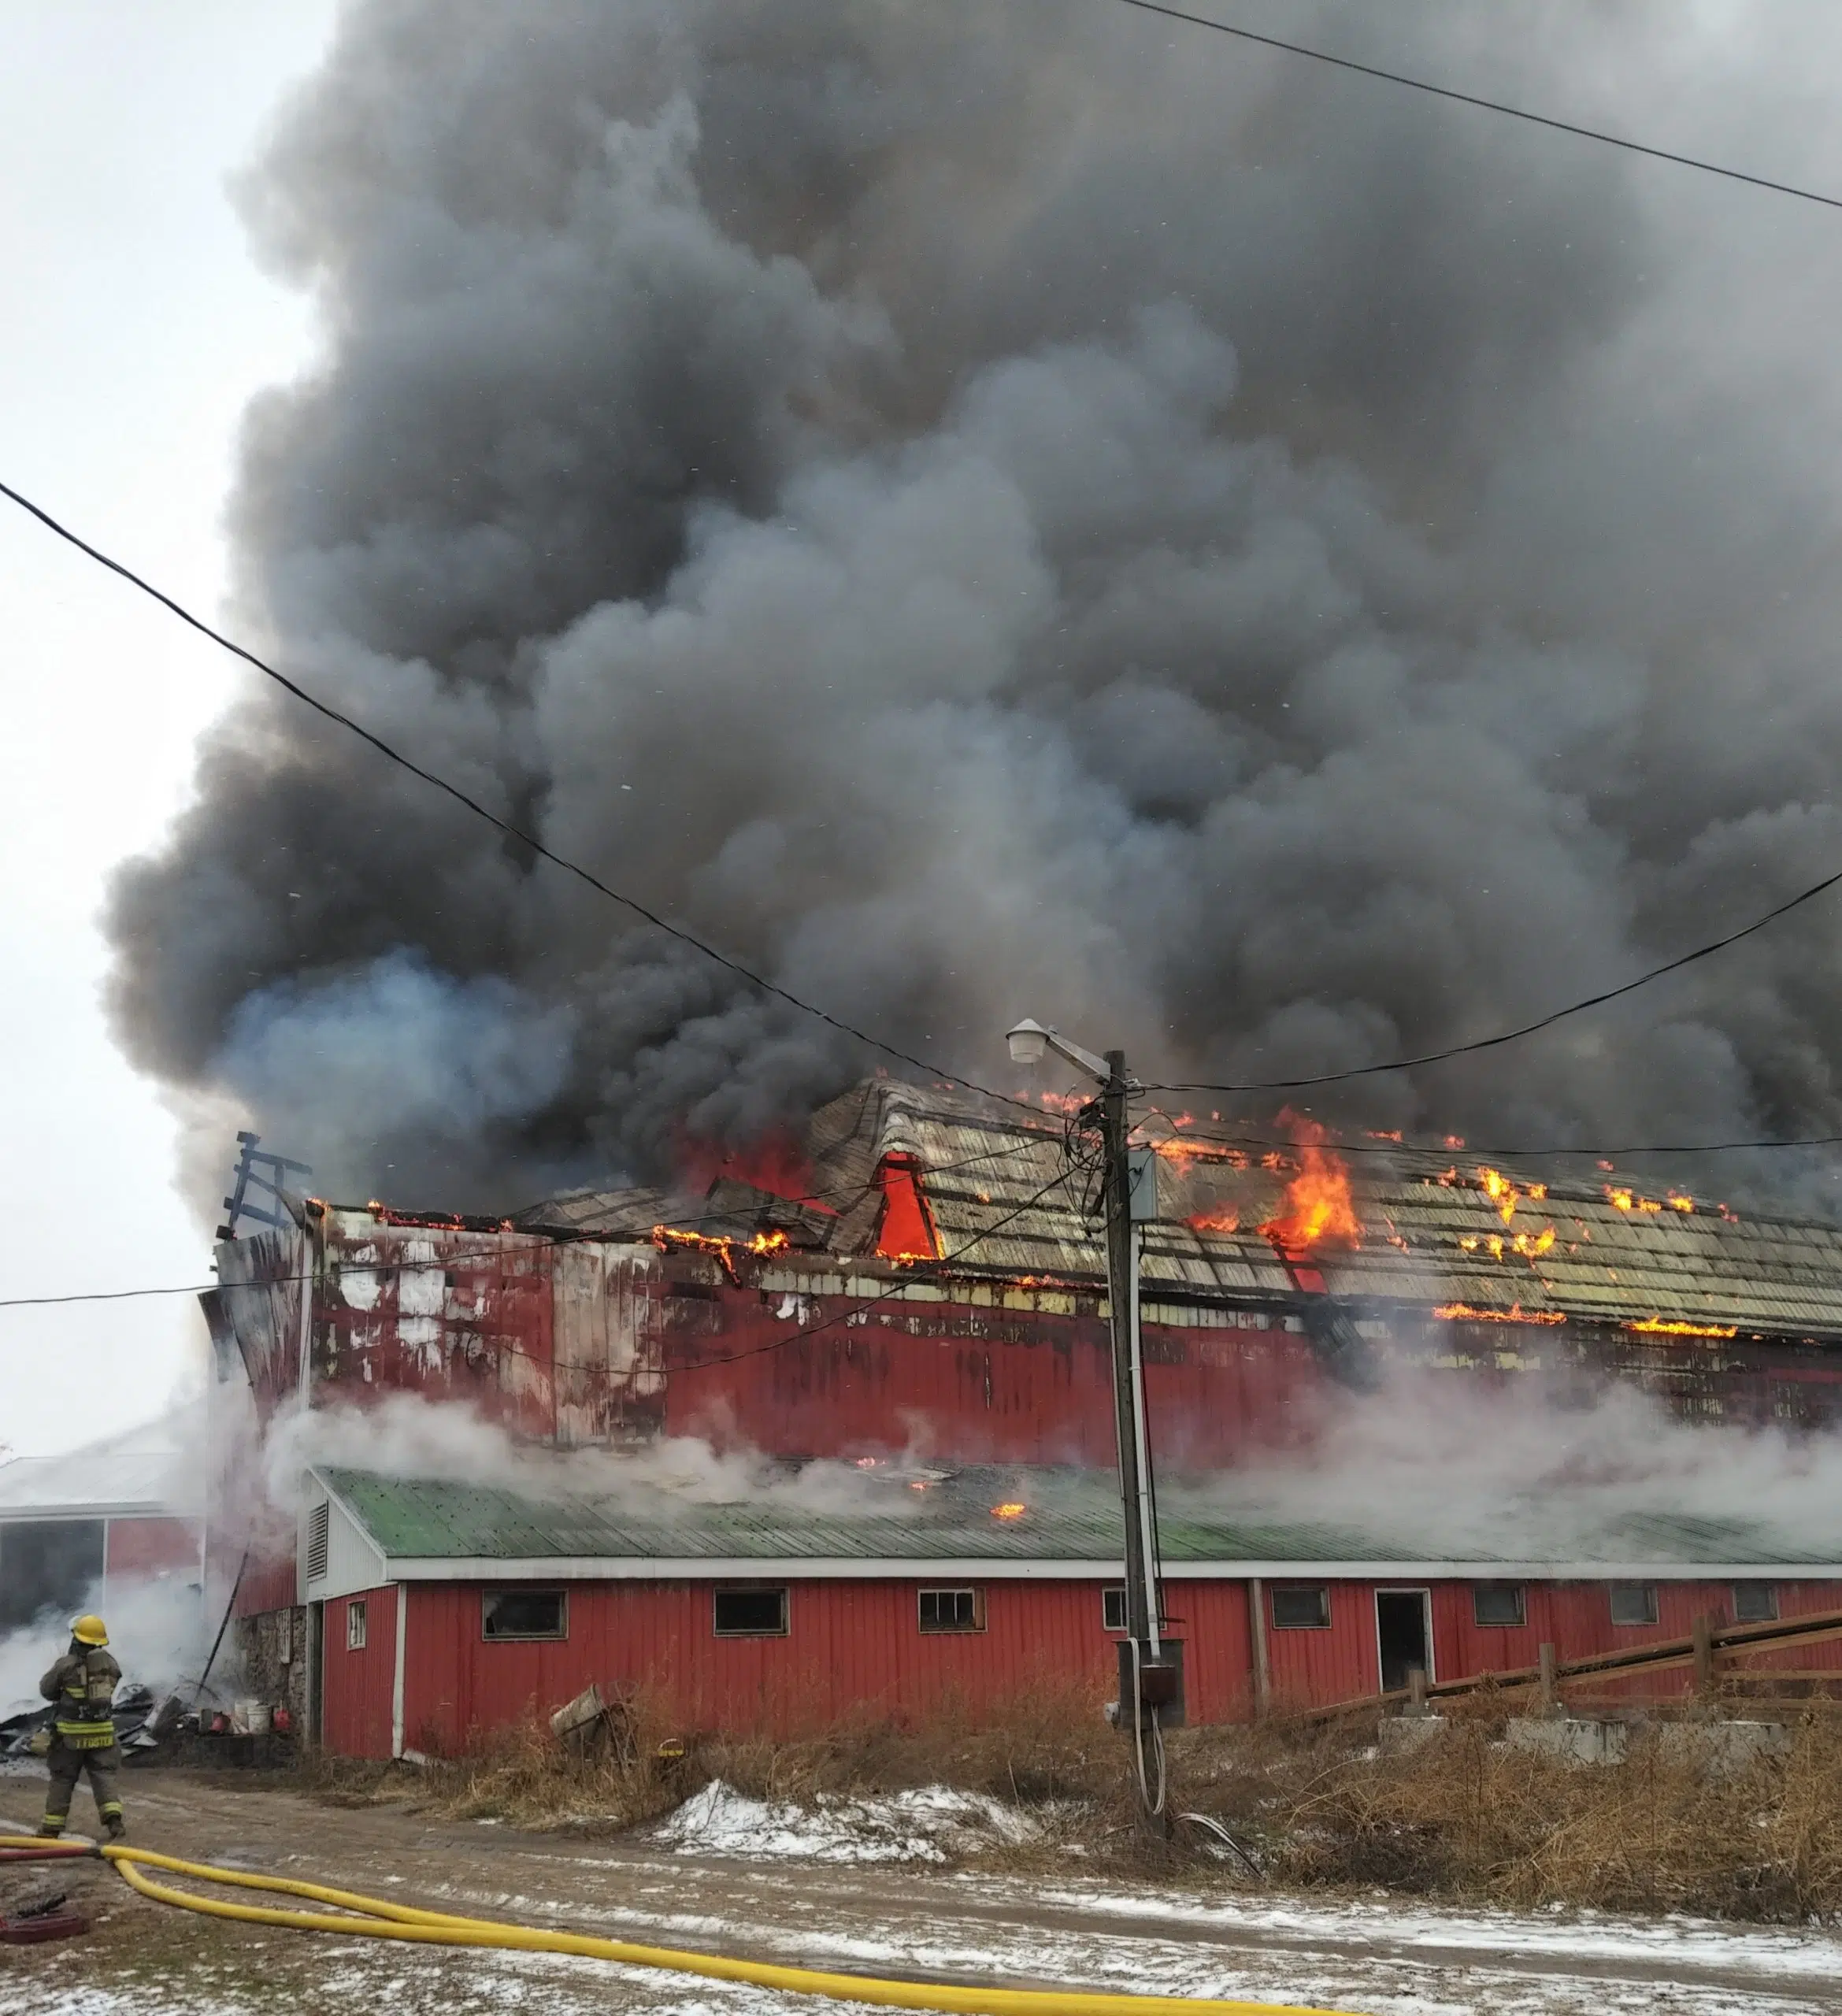 Busiest December ever for Quinte West firefighters